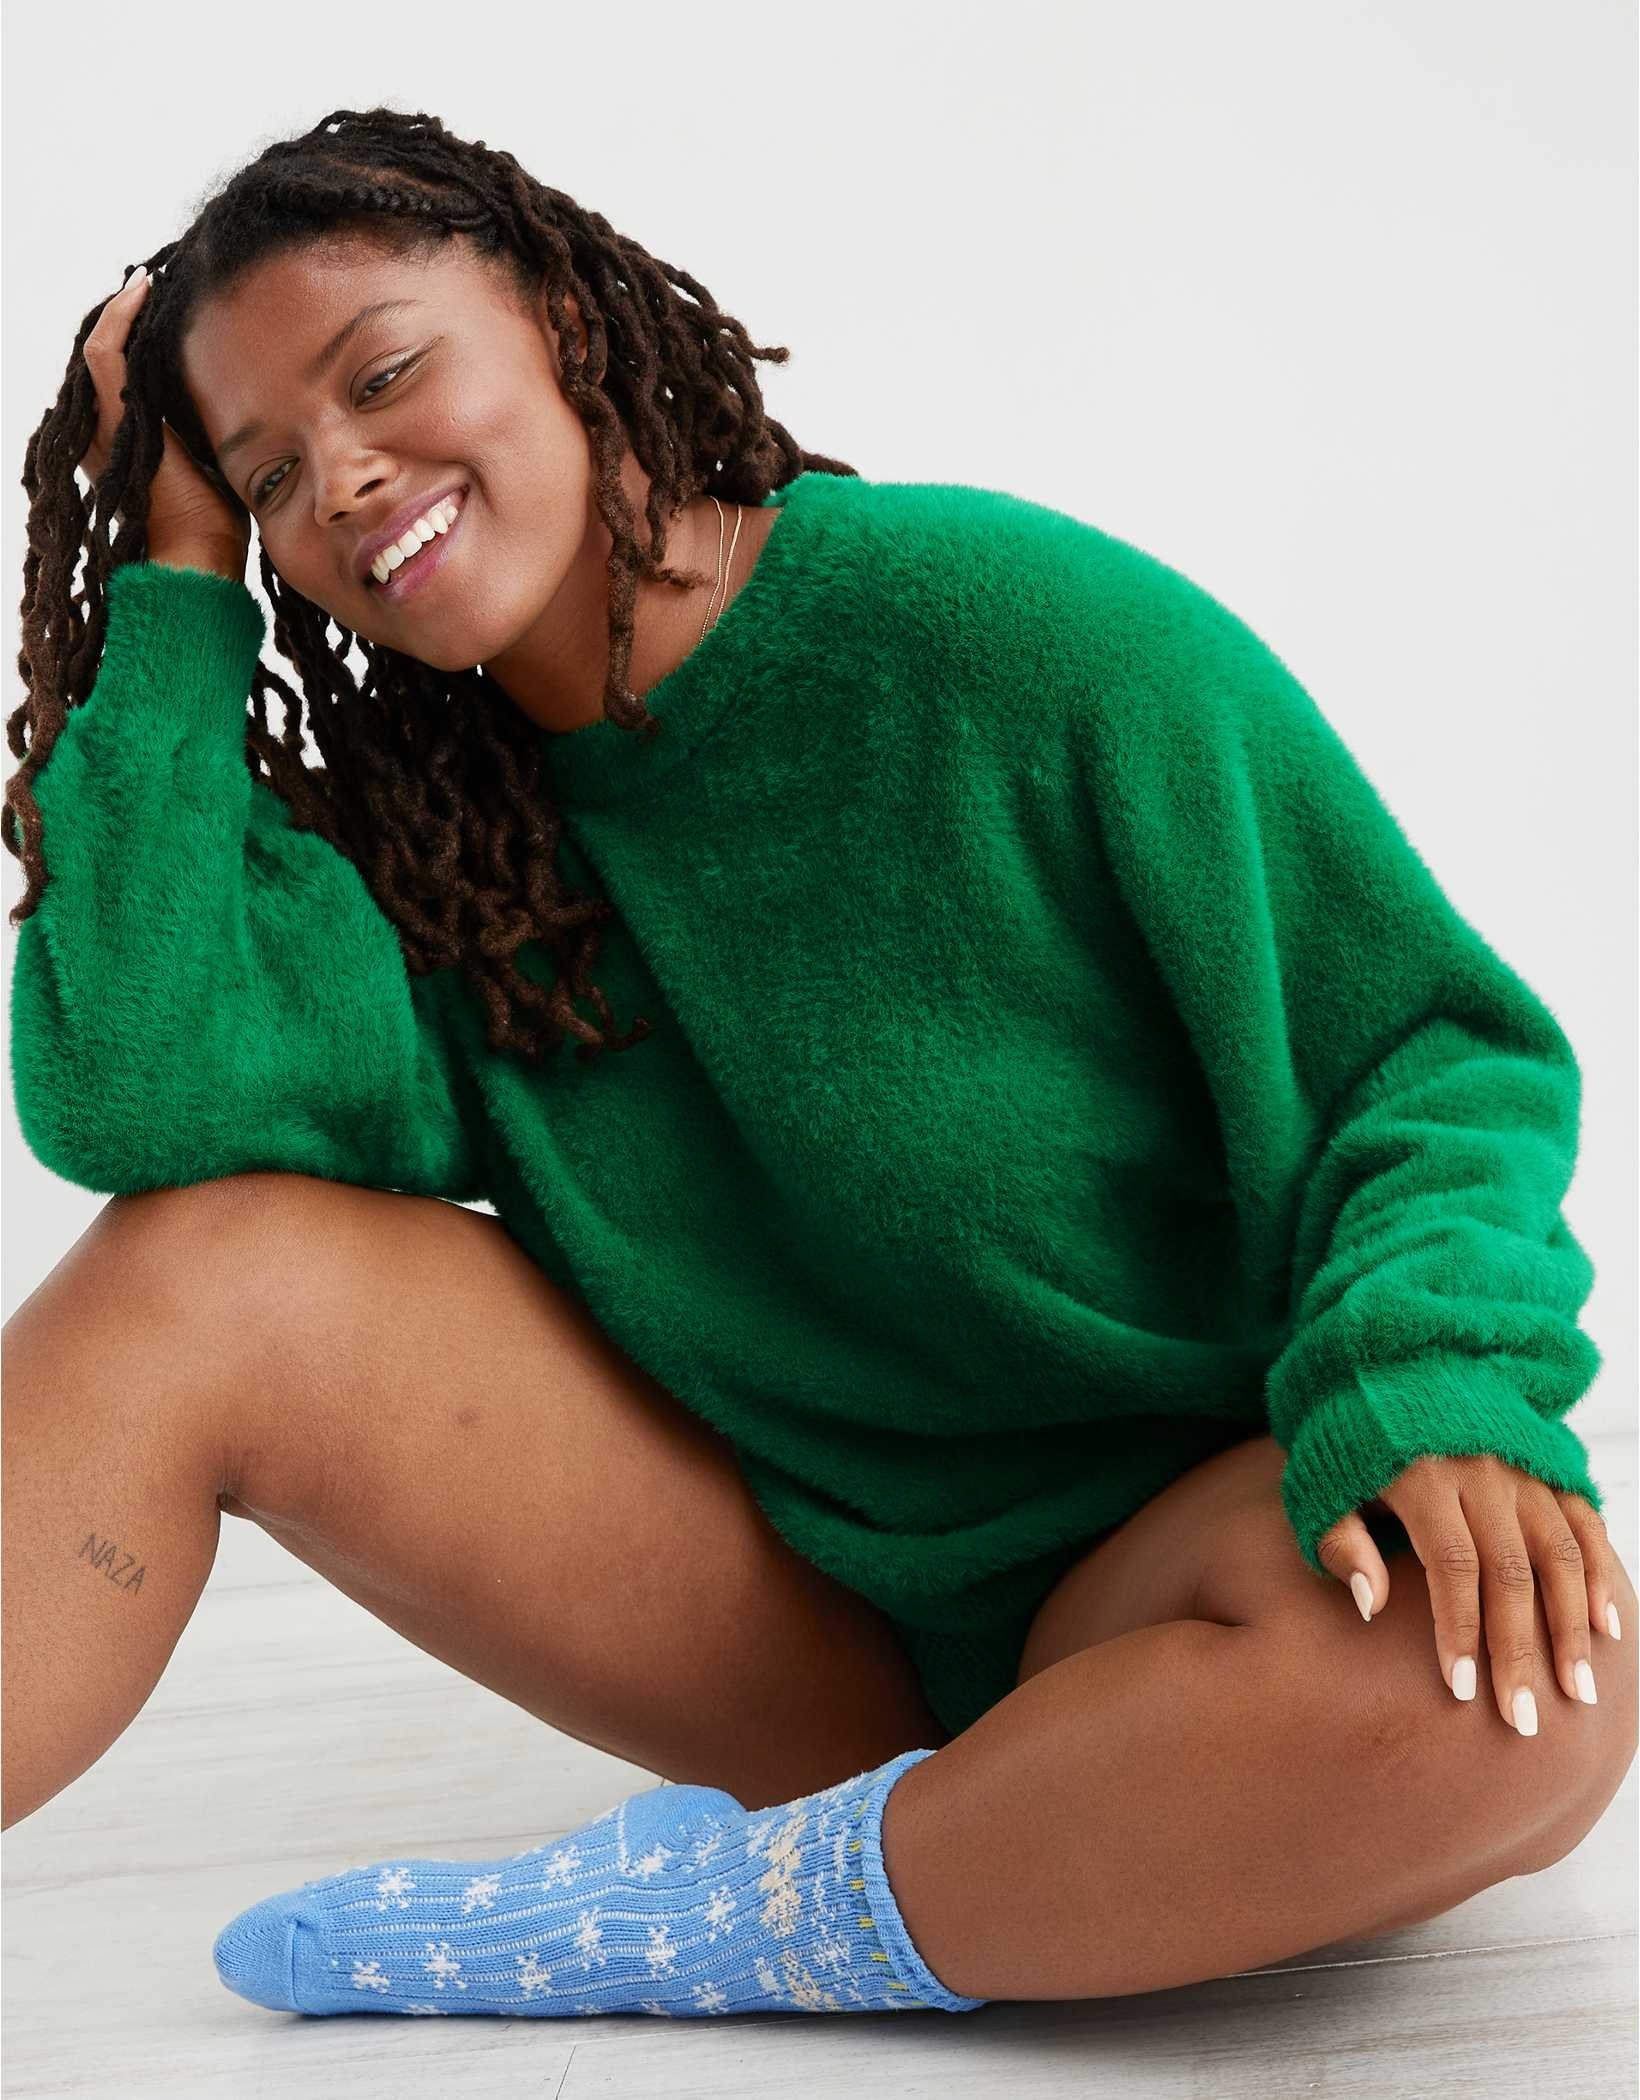 A model in the bright leaf green sweater